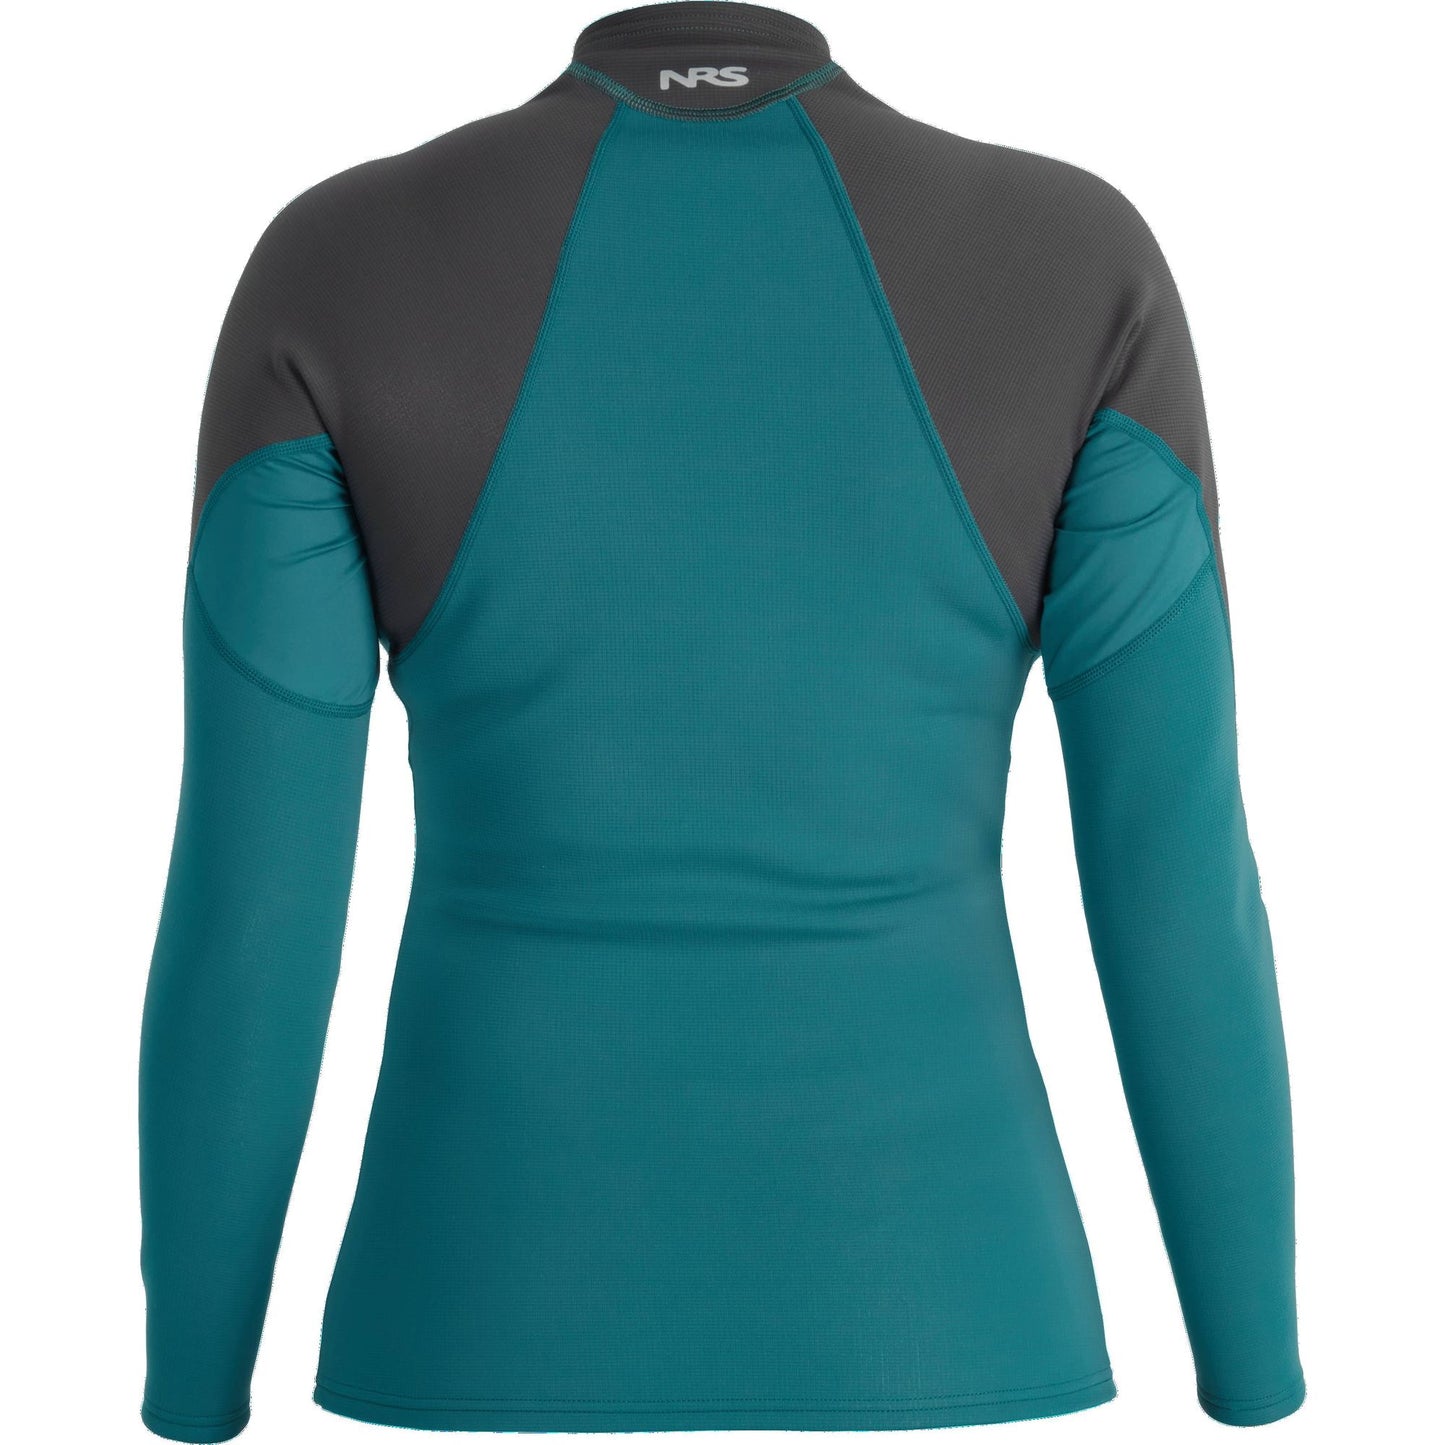 The back view of a women's long-sleeved NRS Hydroskin 0.5 Long Sleeve Shirt - Women's, an insulating top in her layering arsenal.